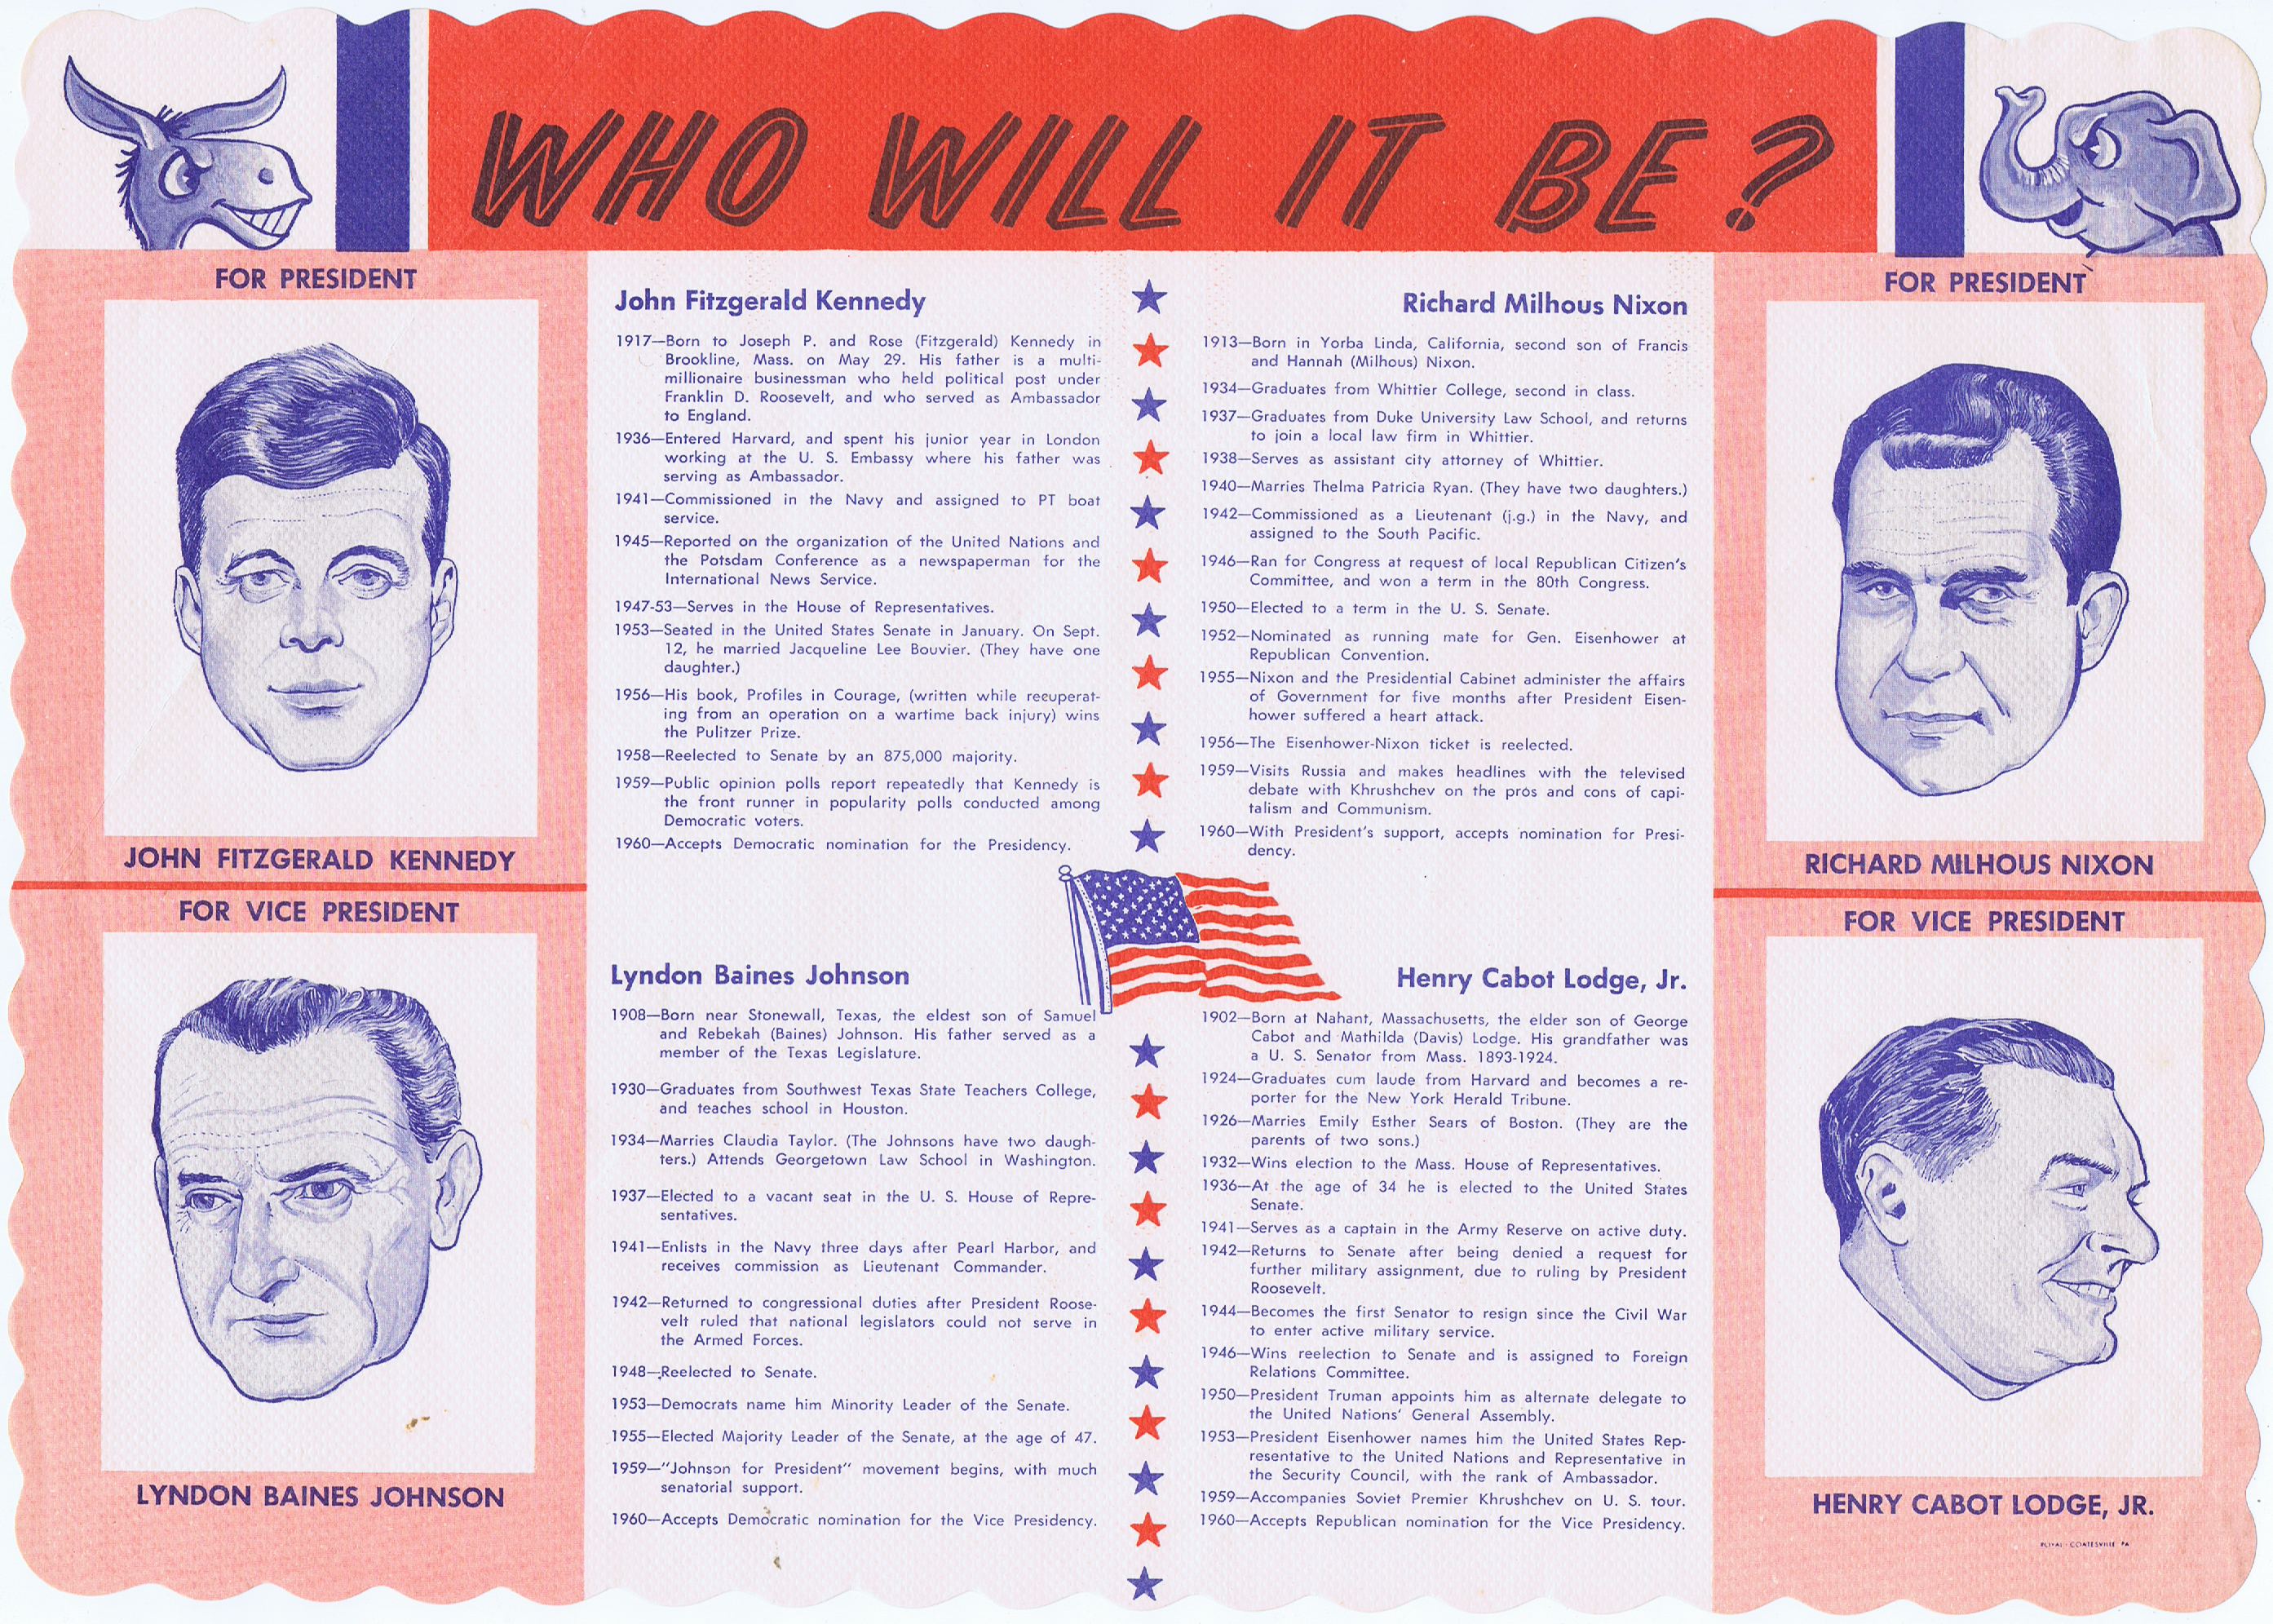 J824	WHO WILL IT BE? ORIGINAL 1960 DINER PLACEMAT SHOWING JFK AND NIXON WITH THEIR VICE PRESIDENTS